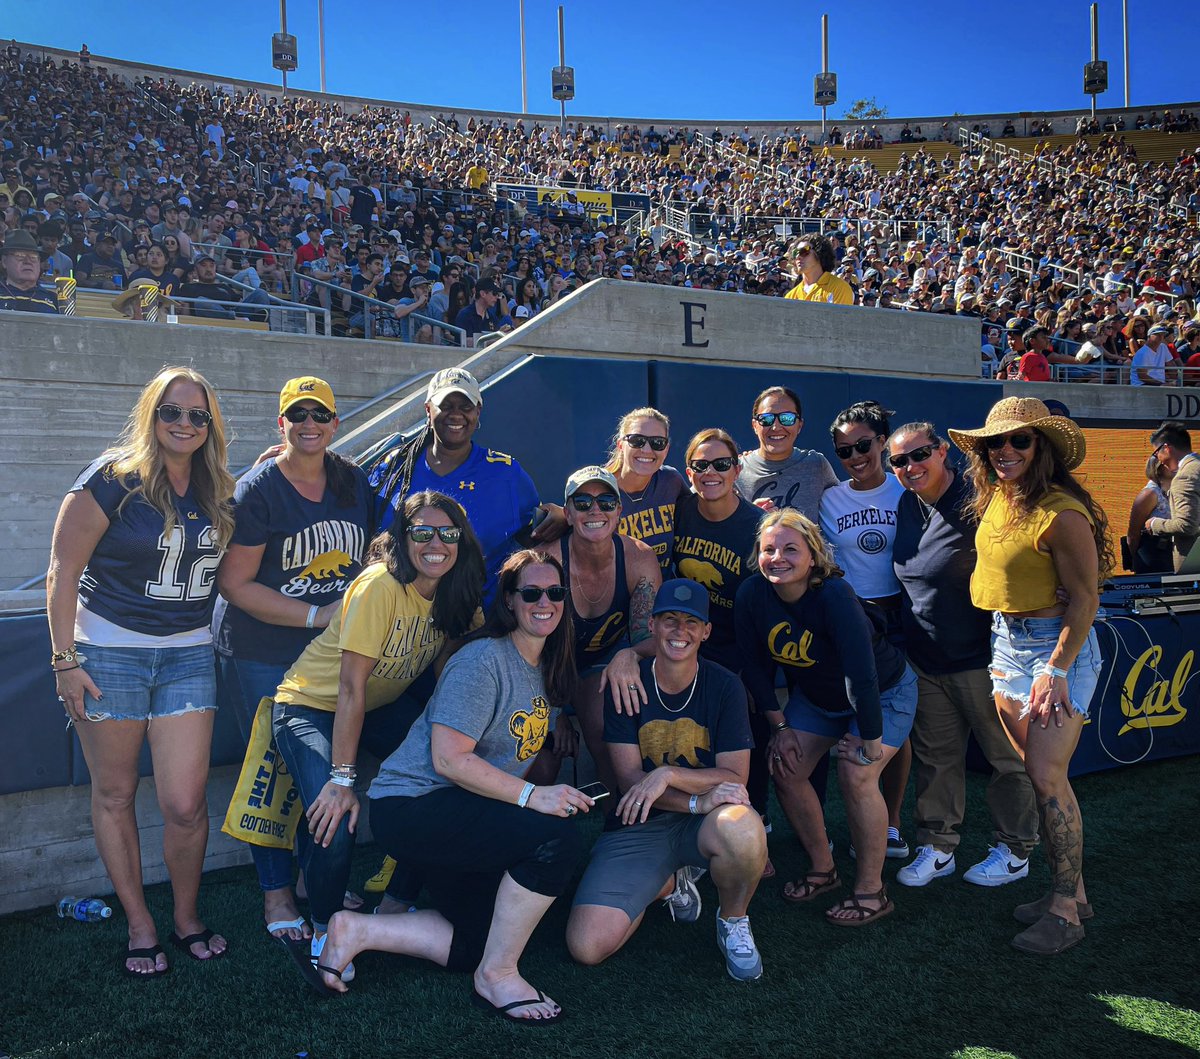 🏆 CHAMPS IN THE HOUSE 🏆 Great to have our 2002 NCAA Champion team back in Berkeley for #CalHC! #GoBears x @NCAASoftball